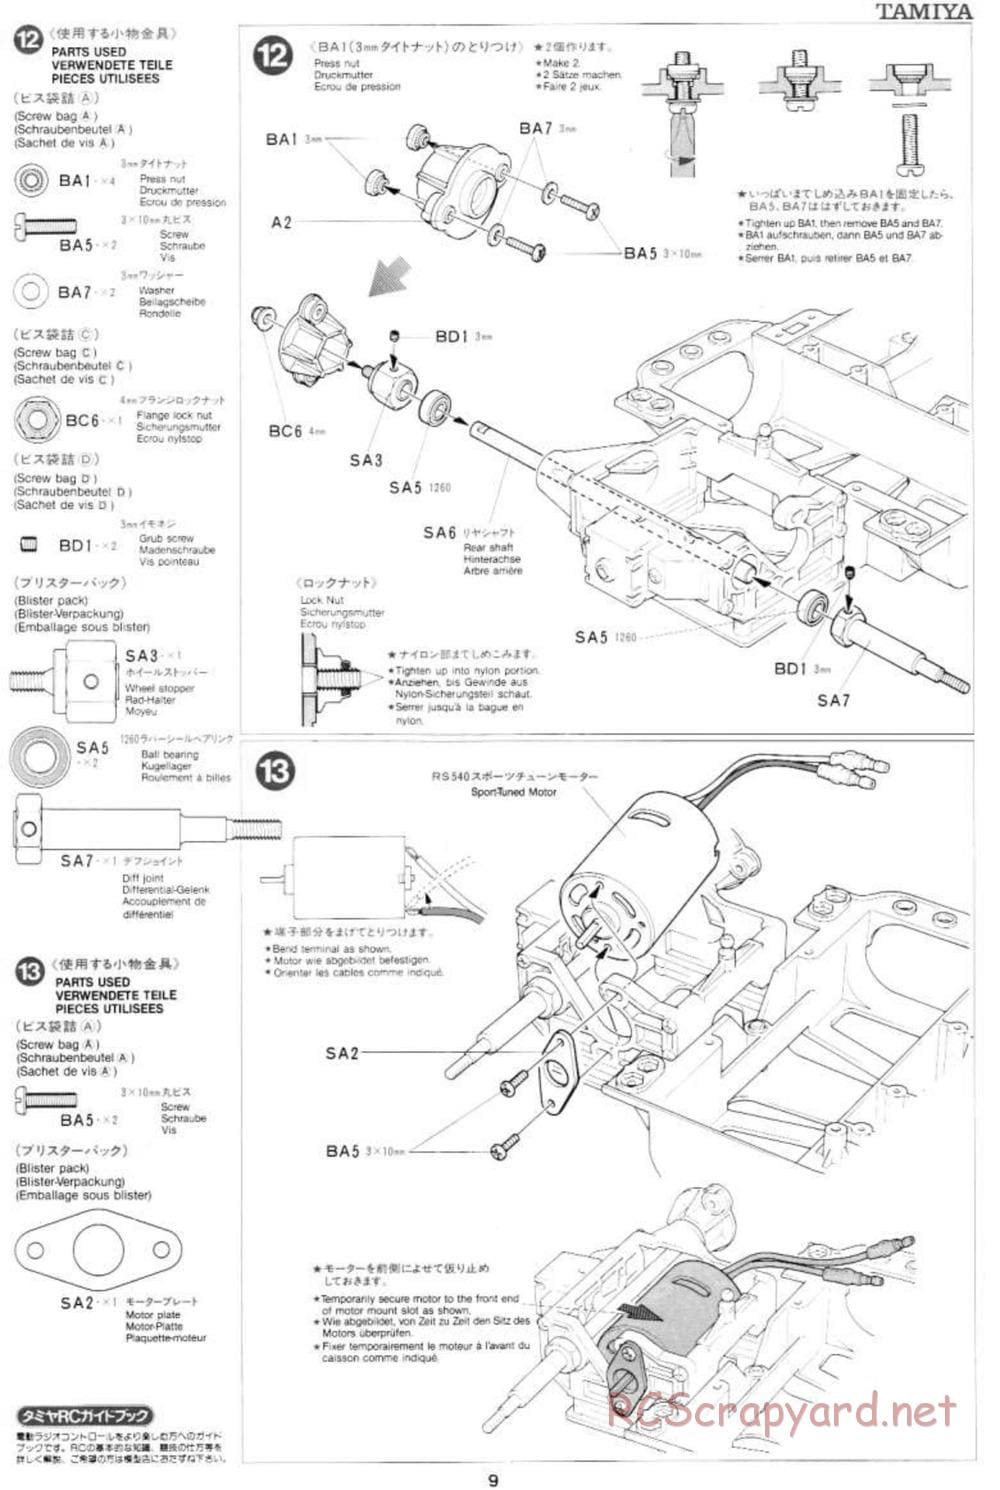 Tamiya - Mercedes-Benz C11 - Group-C Chassis - Manual - Page 9